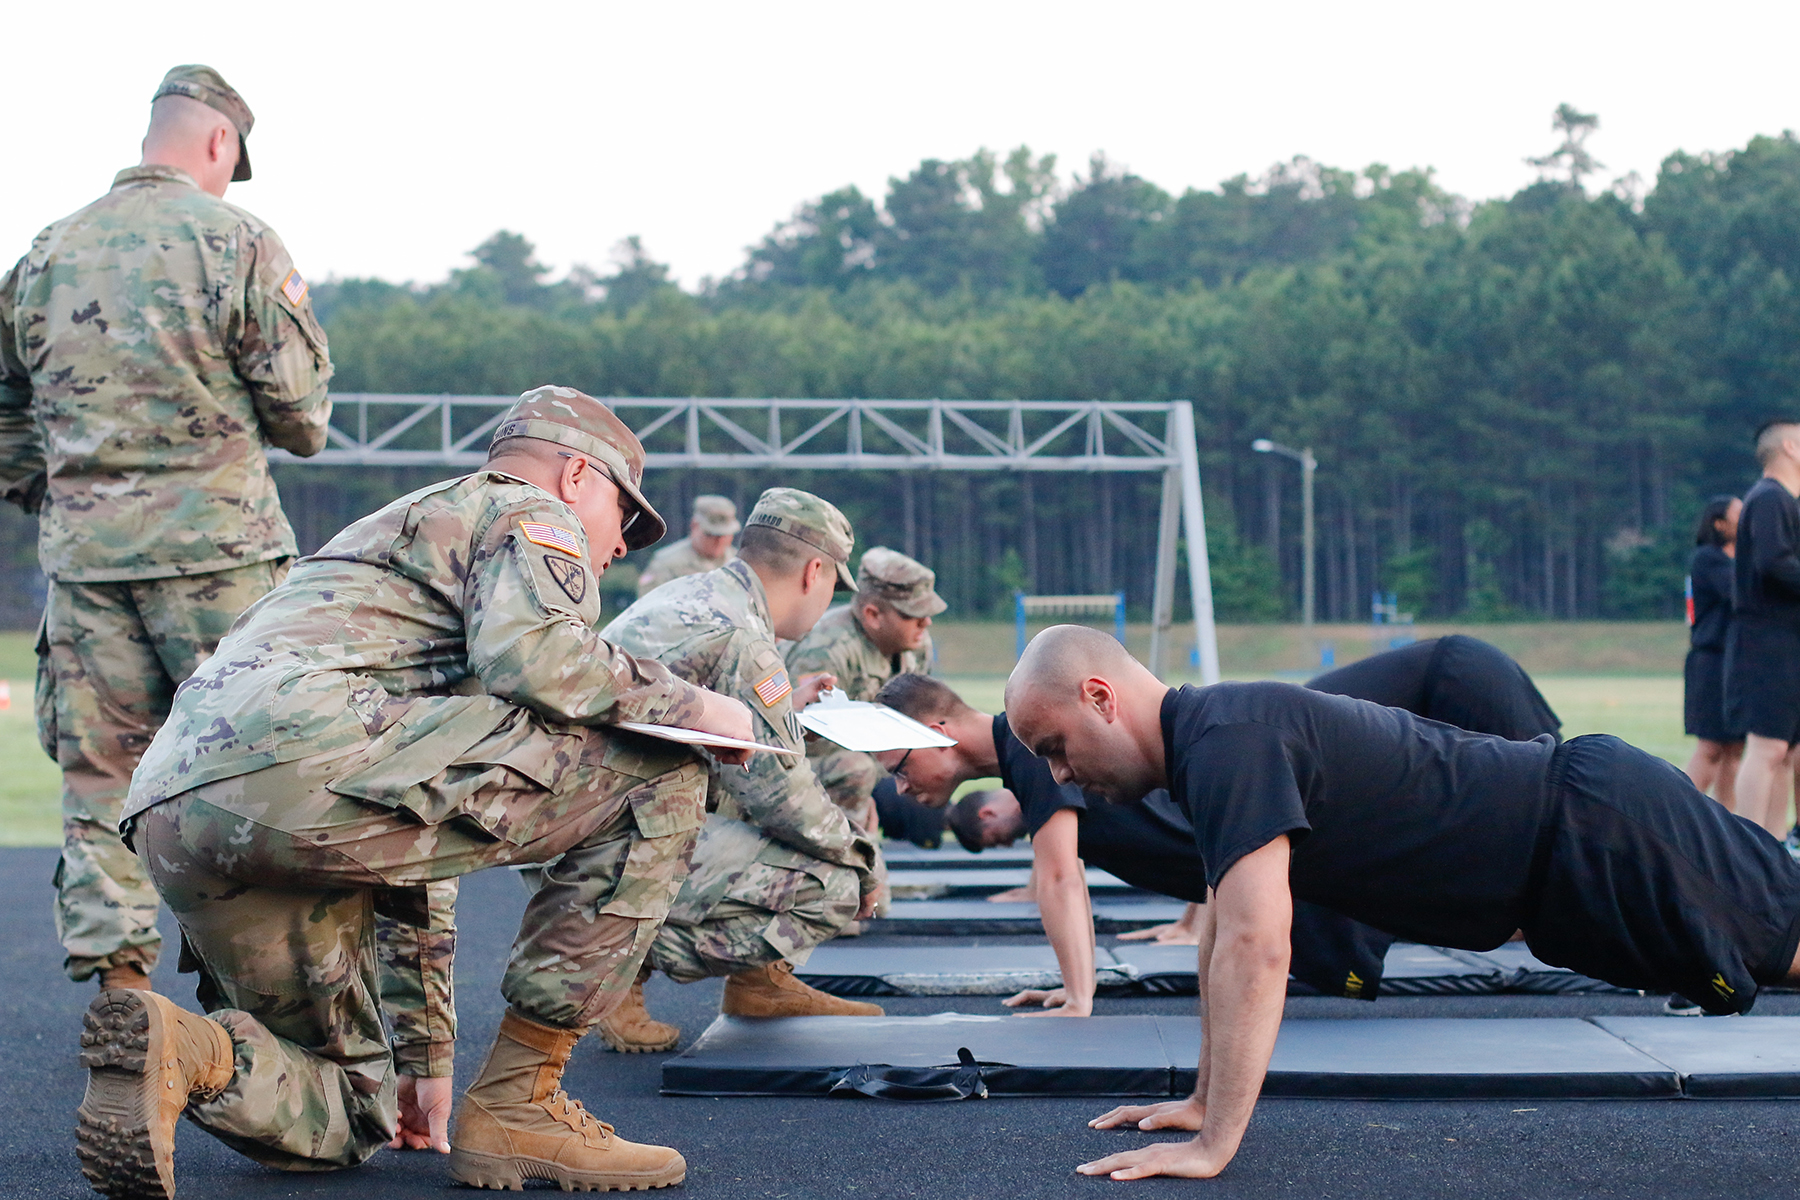 essay on physical fitness in army